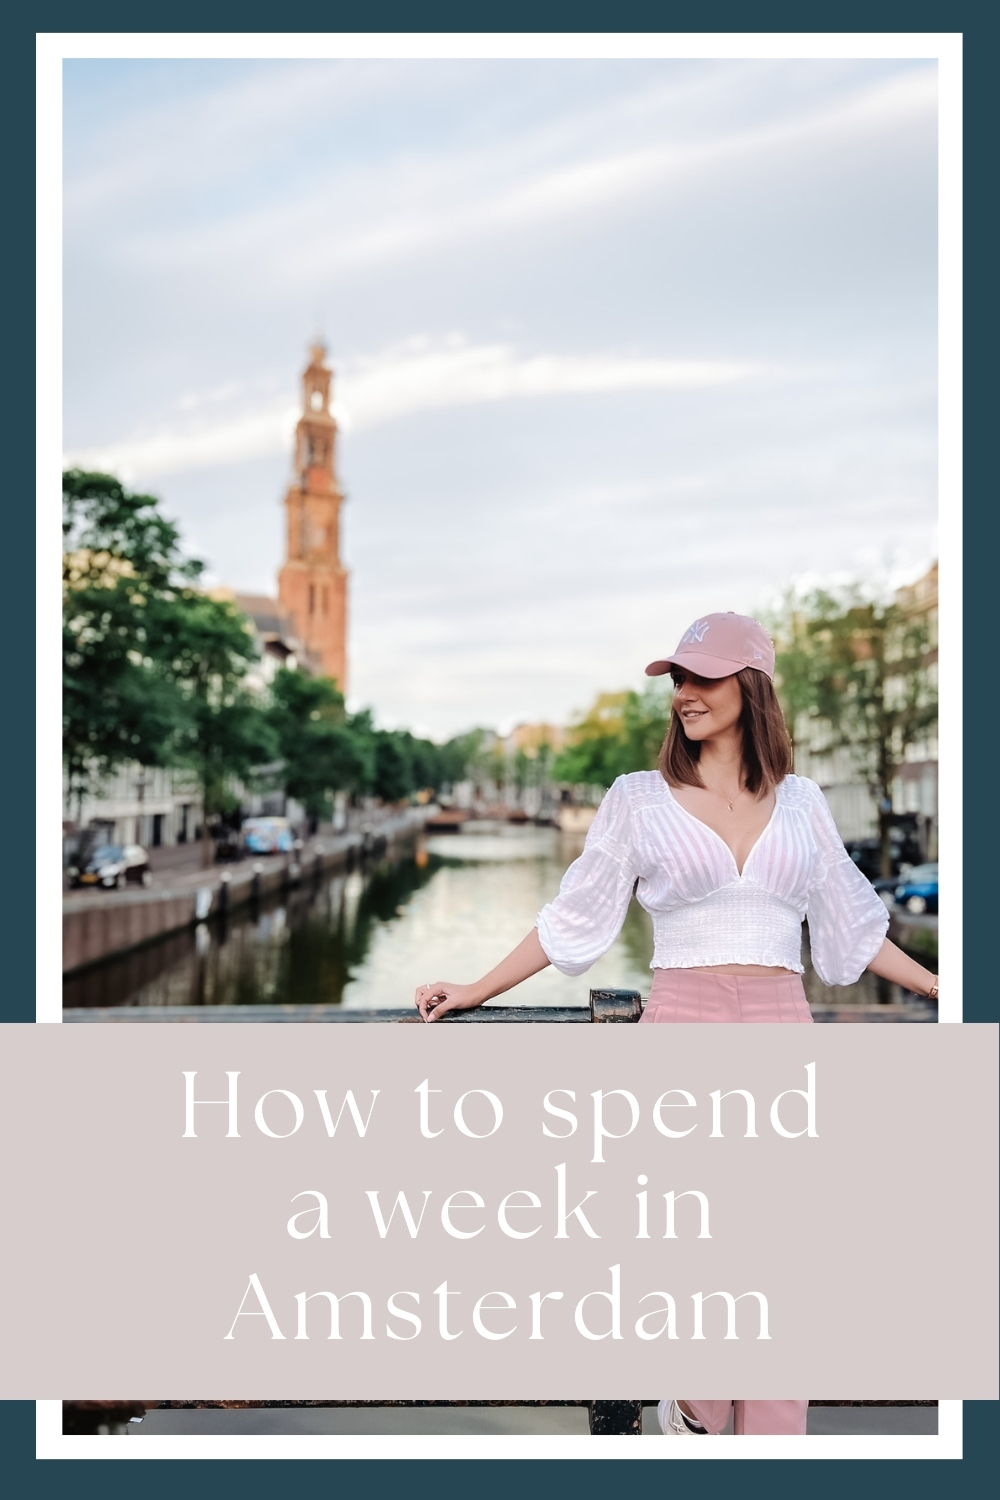 How to spend a week in Amsterdam by My Next Pin